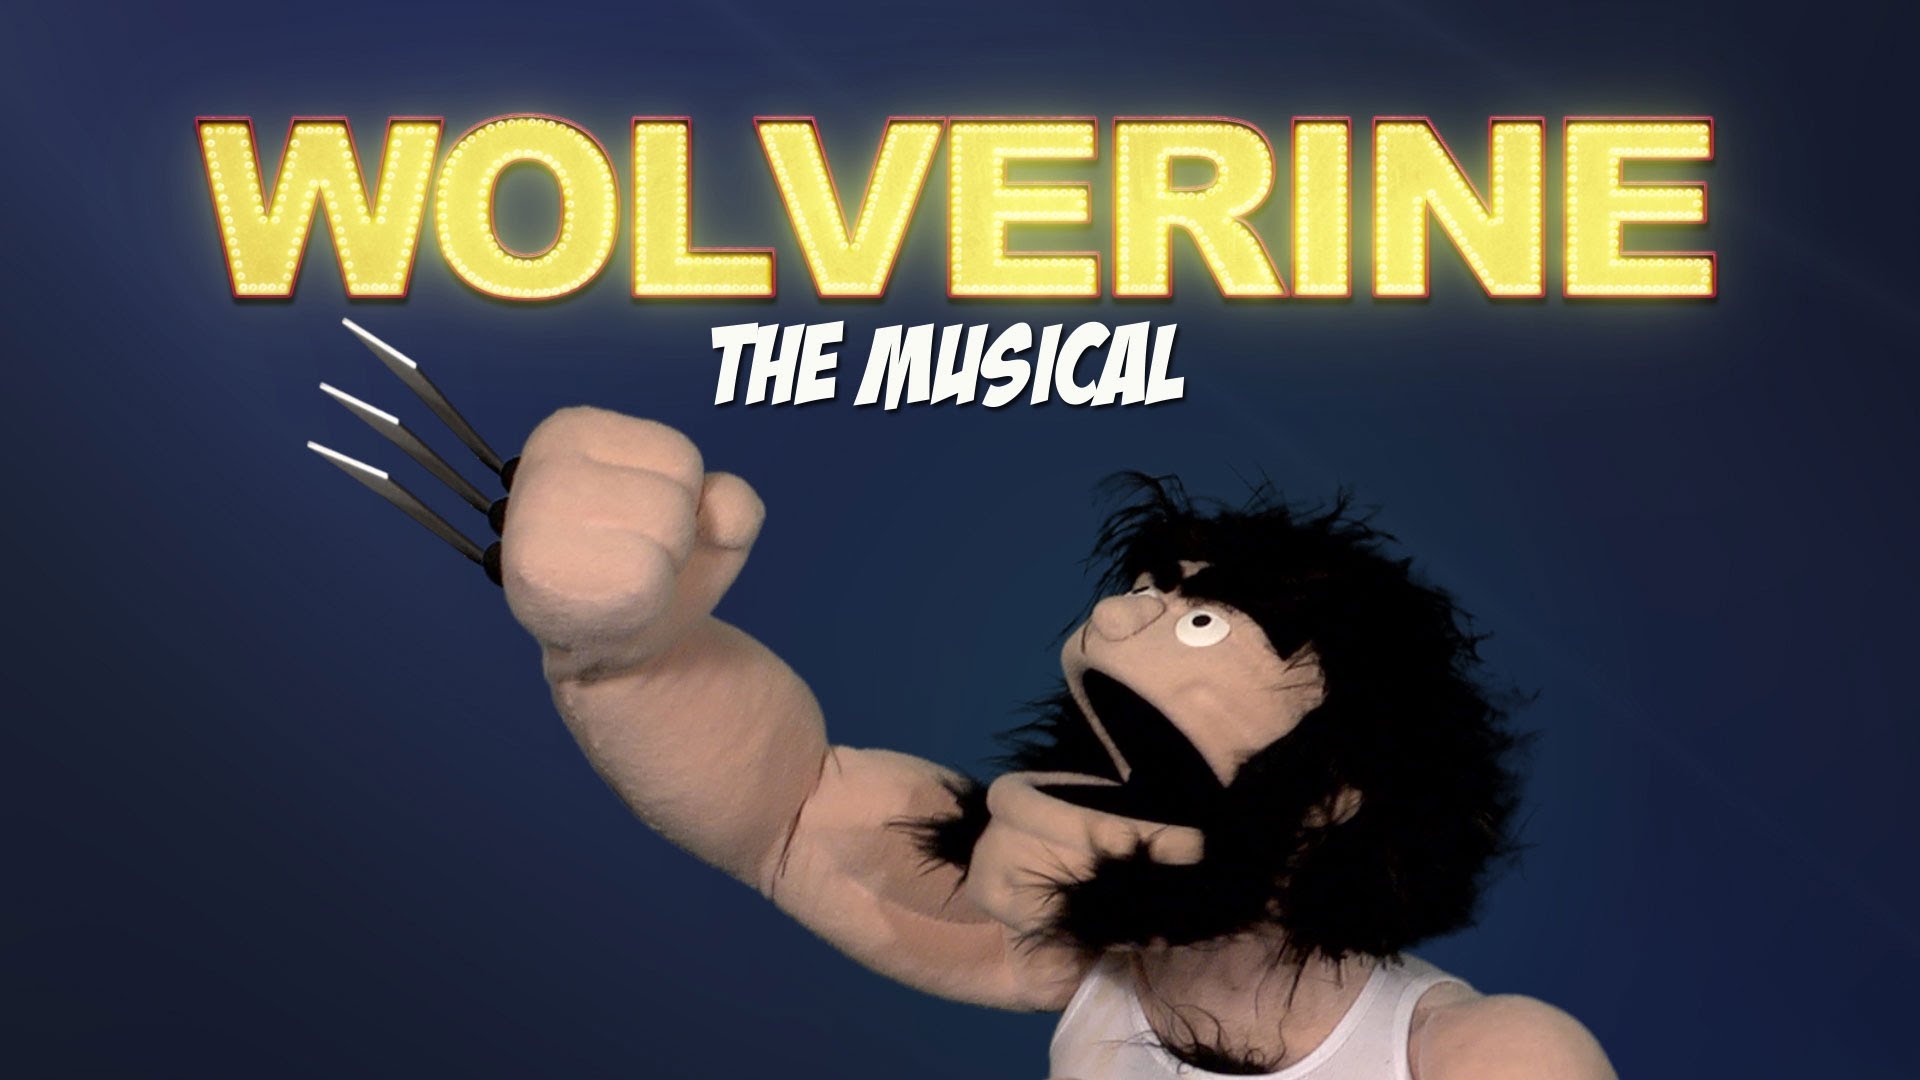 Wolverine: The Musical